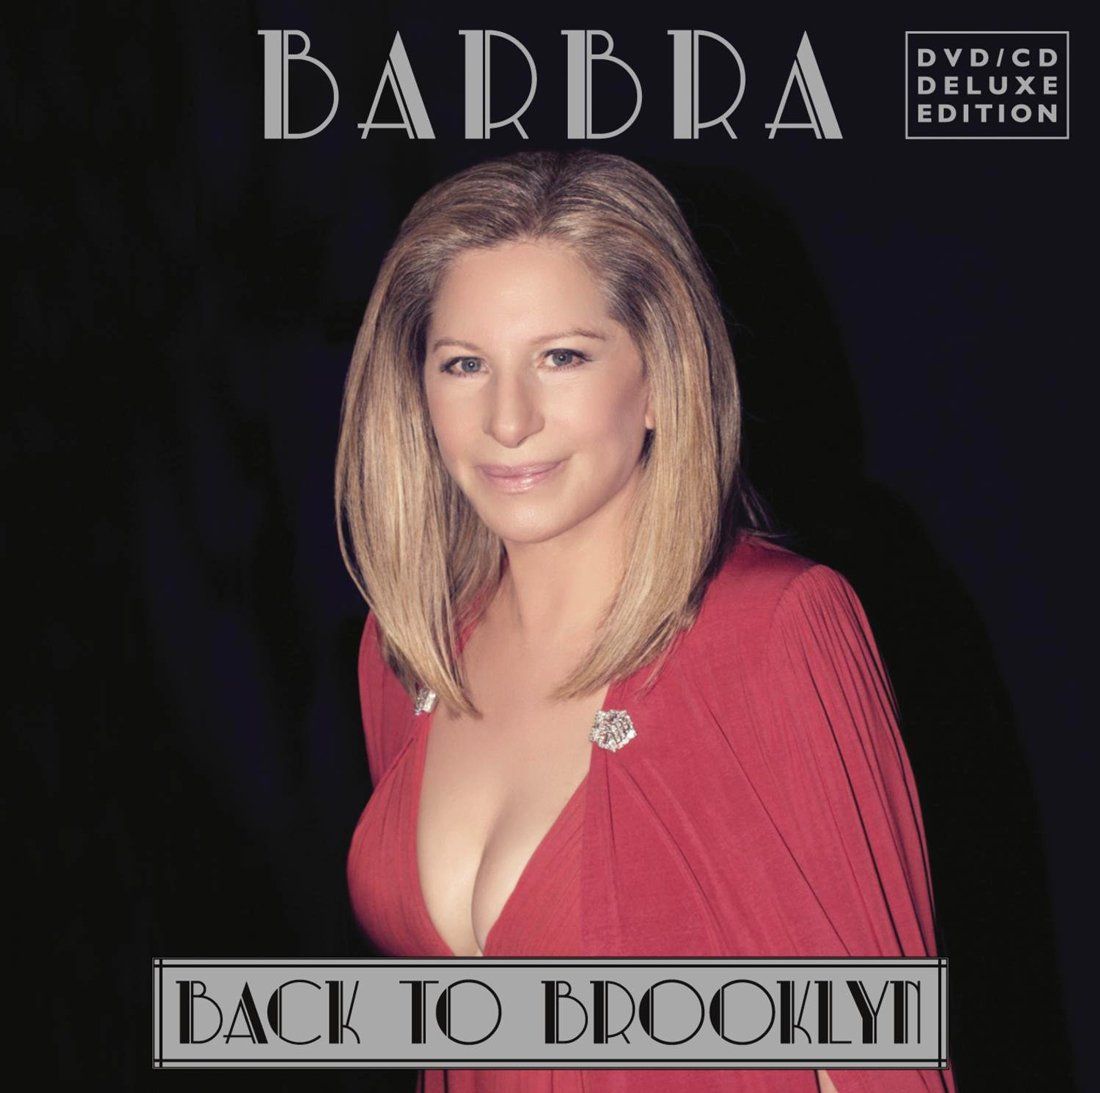 Front cover of Back to Brooklyn DVD/CD